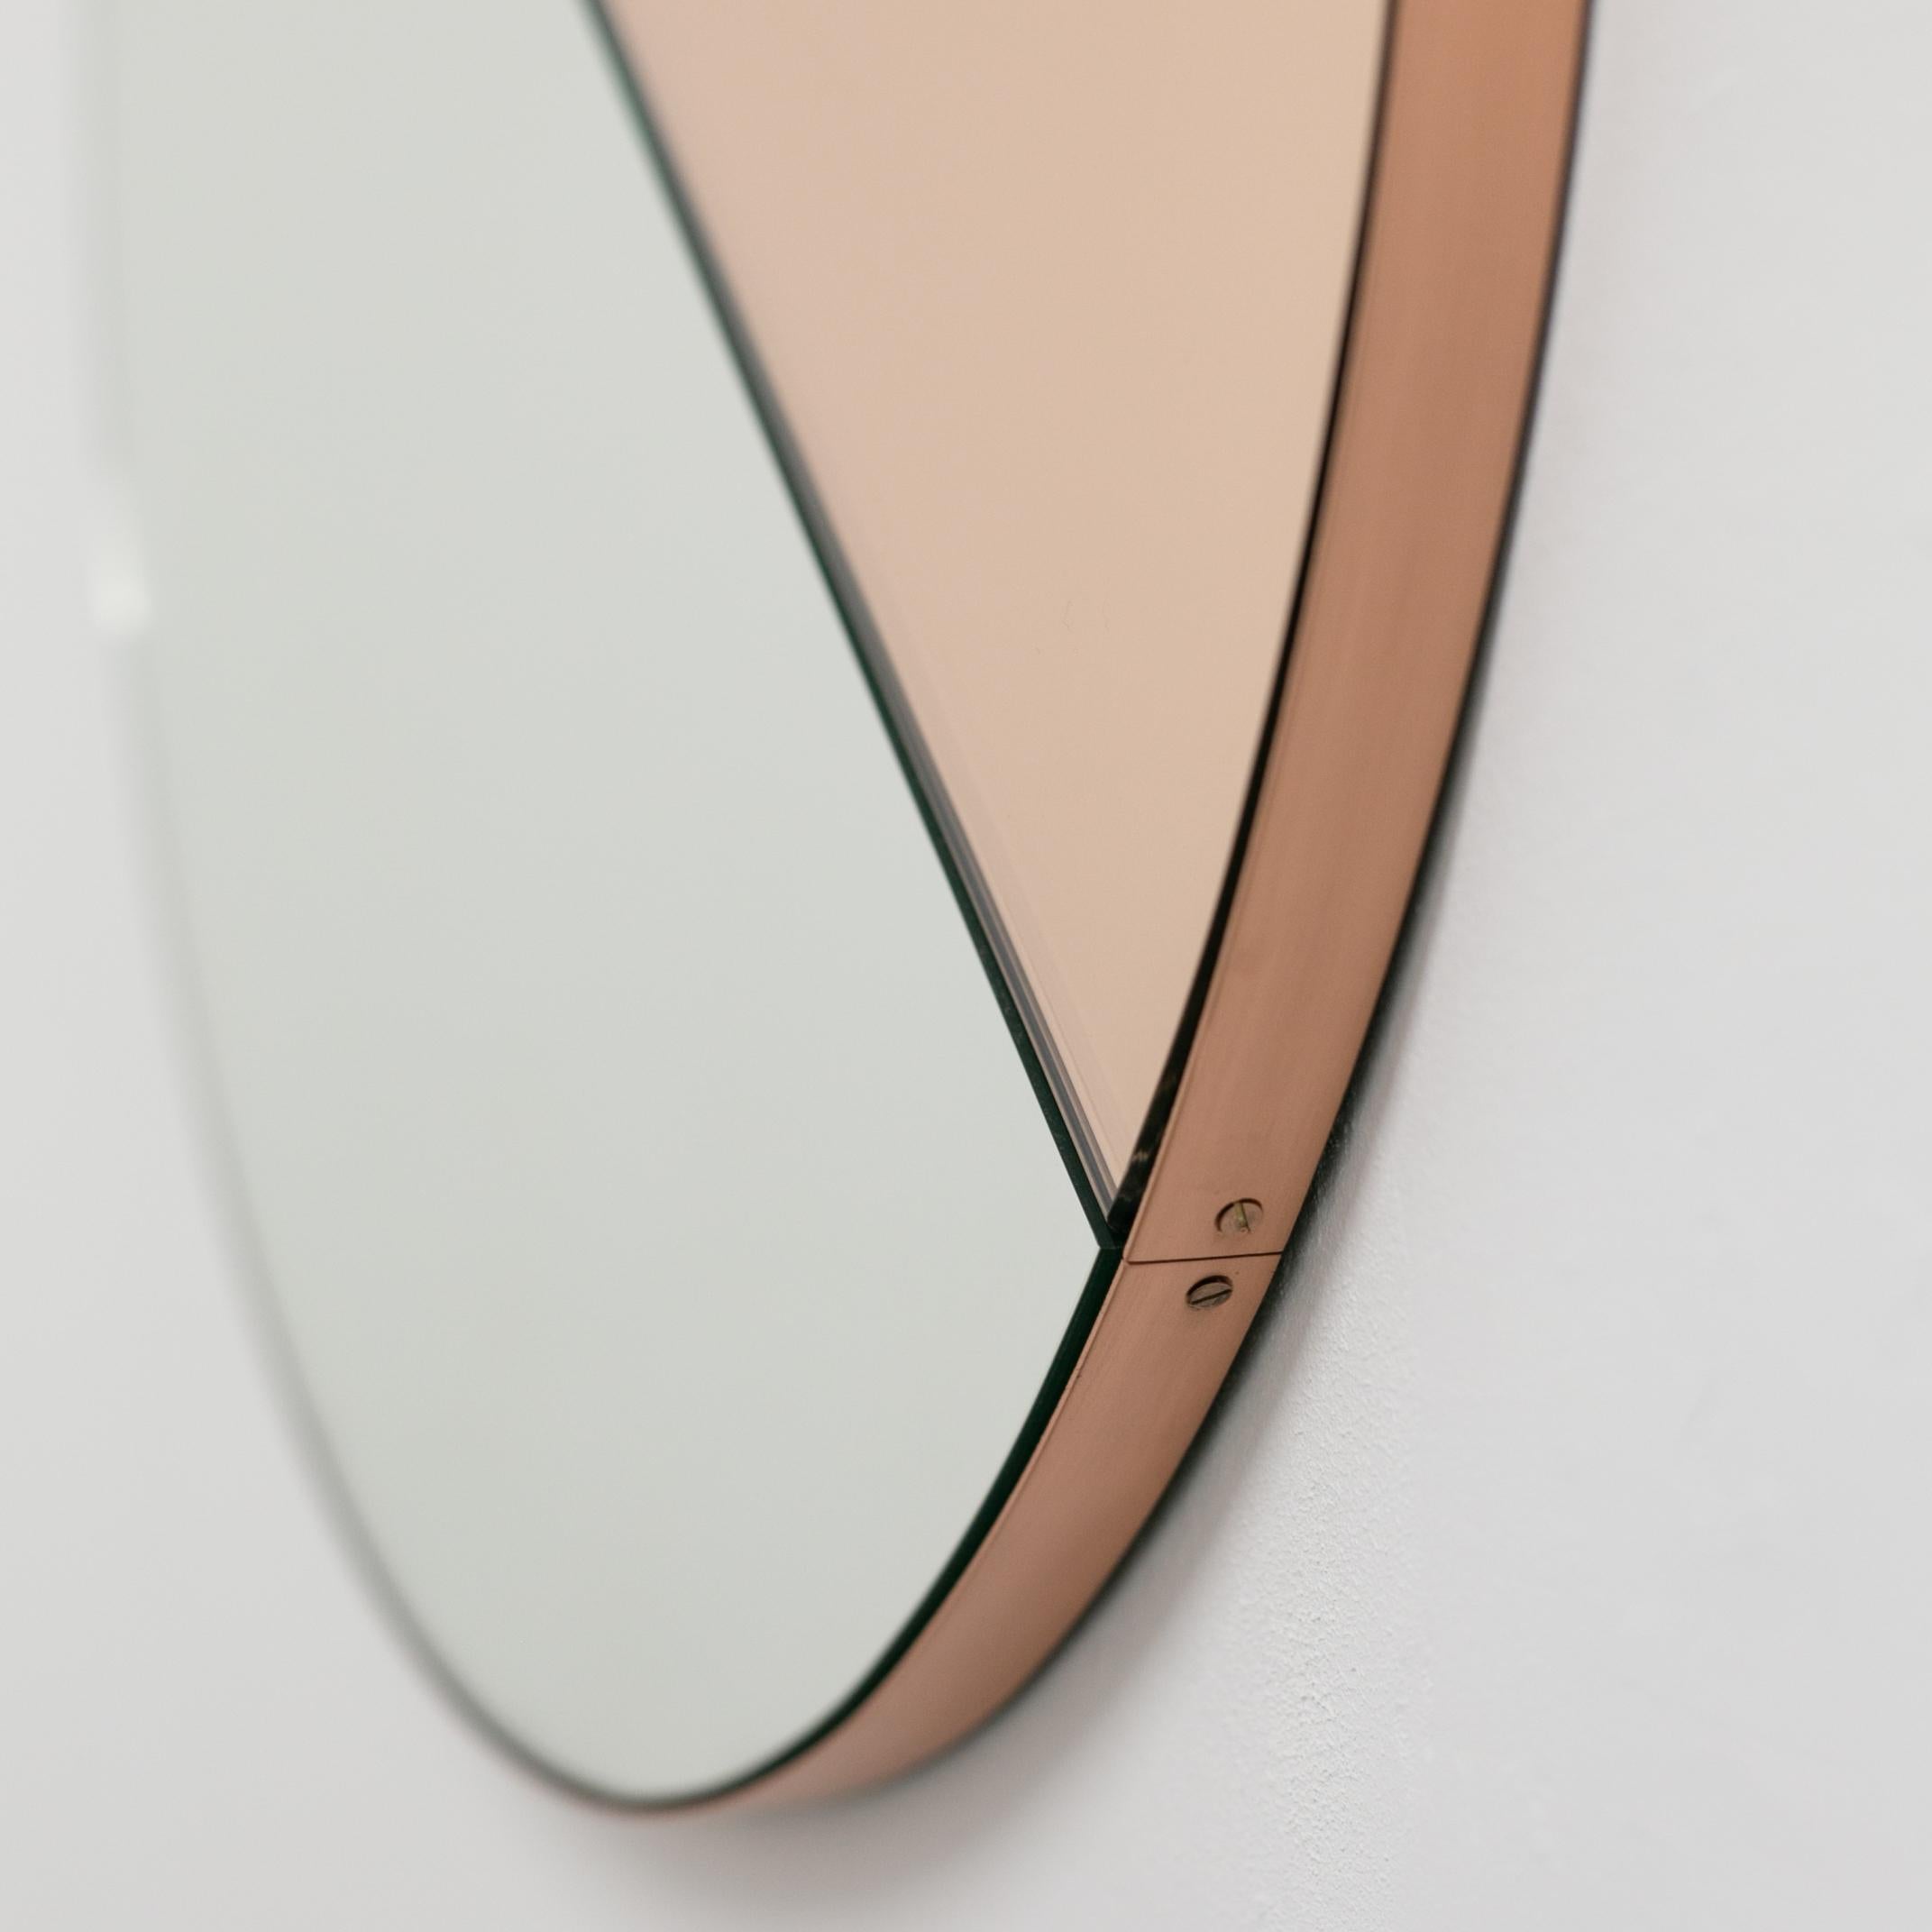 In Stock Orbis Dualis Peach Silver Round Mirror with Copper Frame, Medium For Sale 1